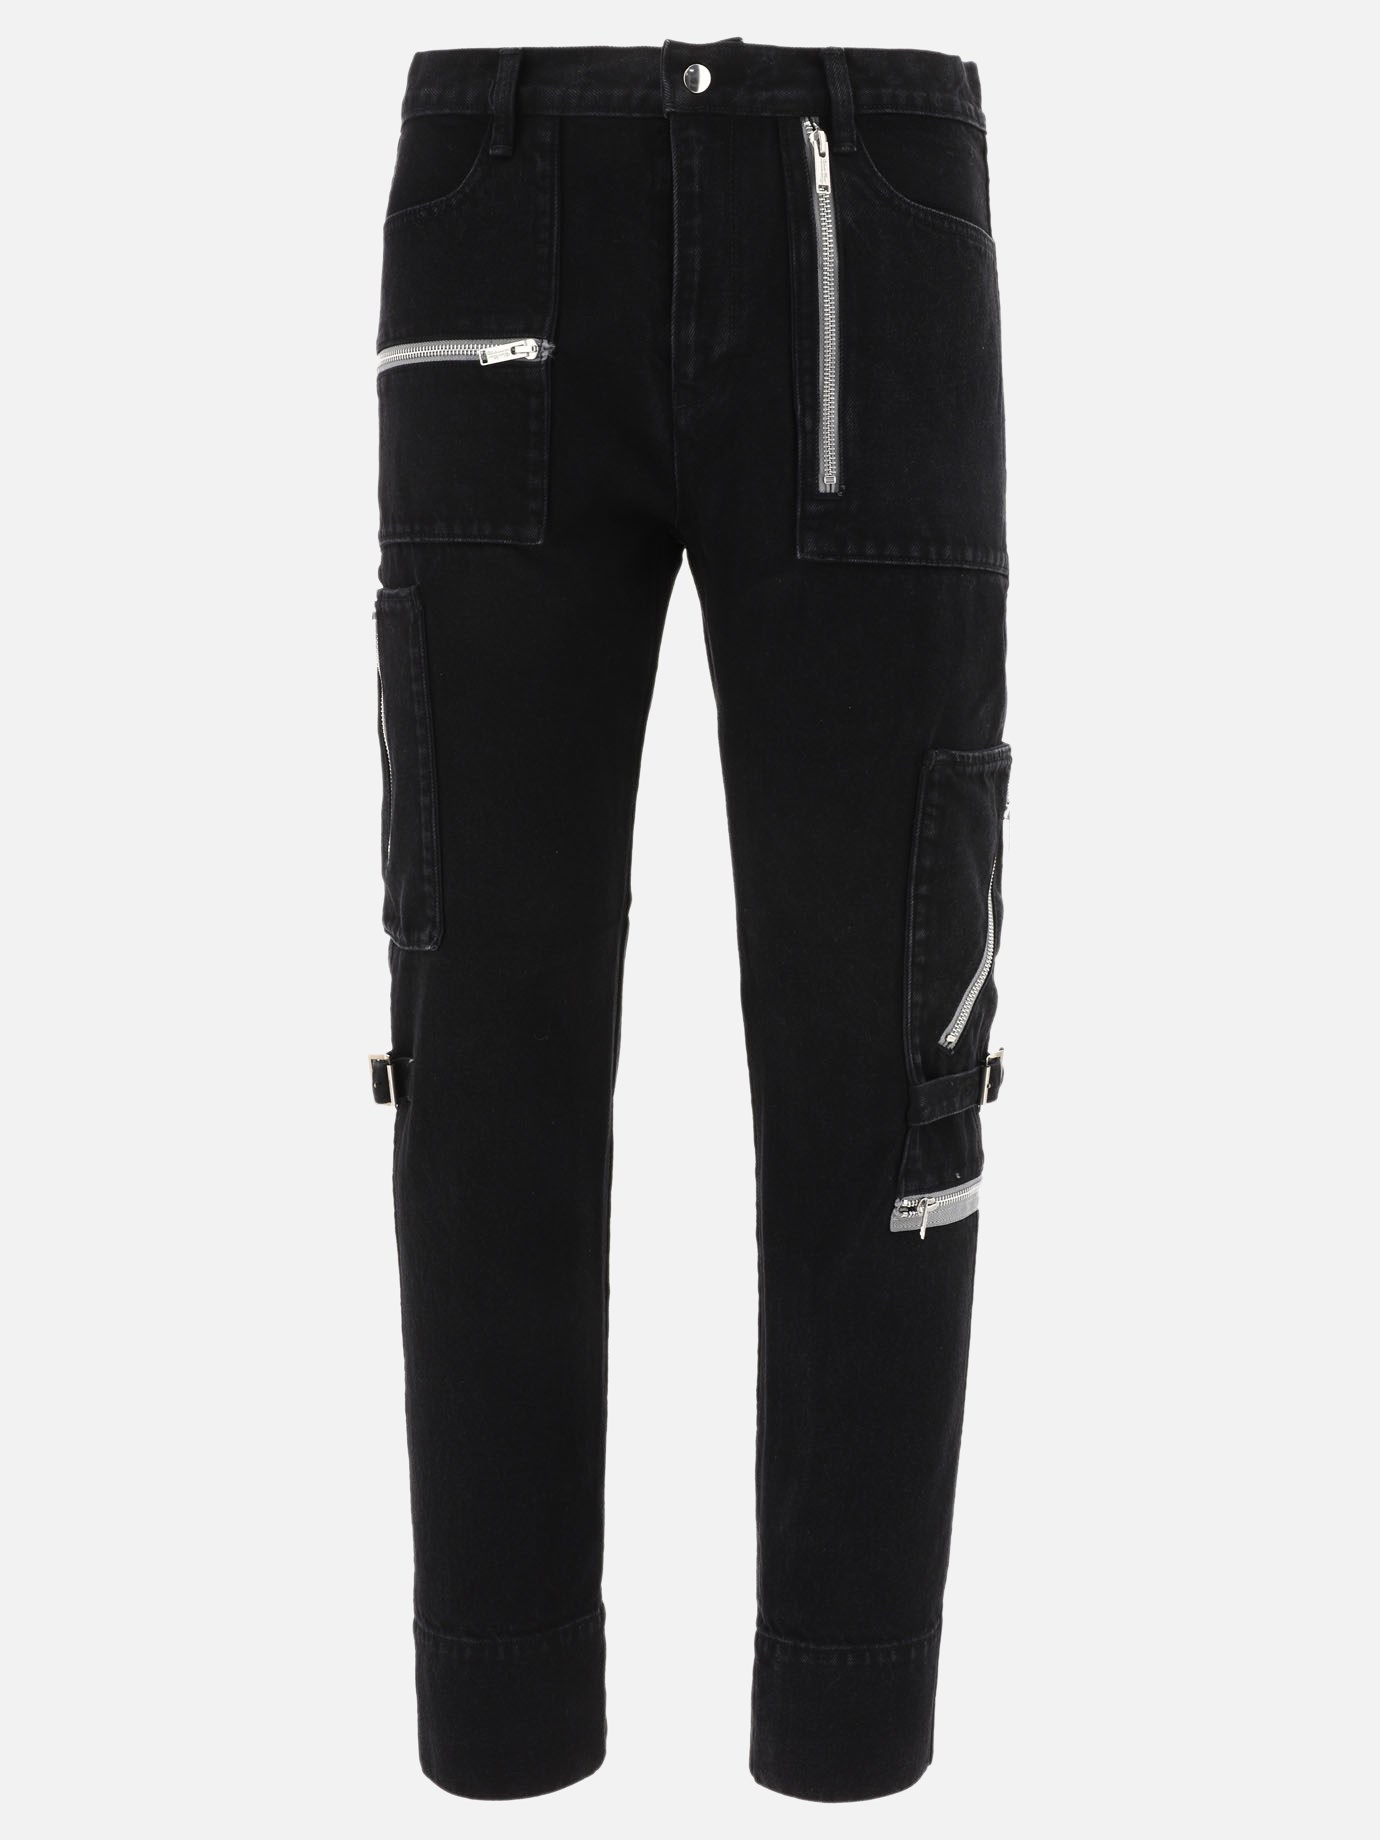 Jeans with zip details